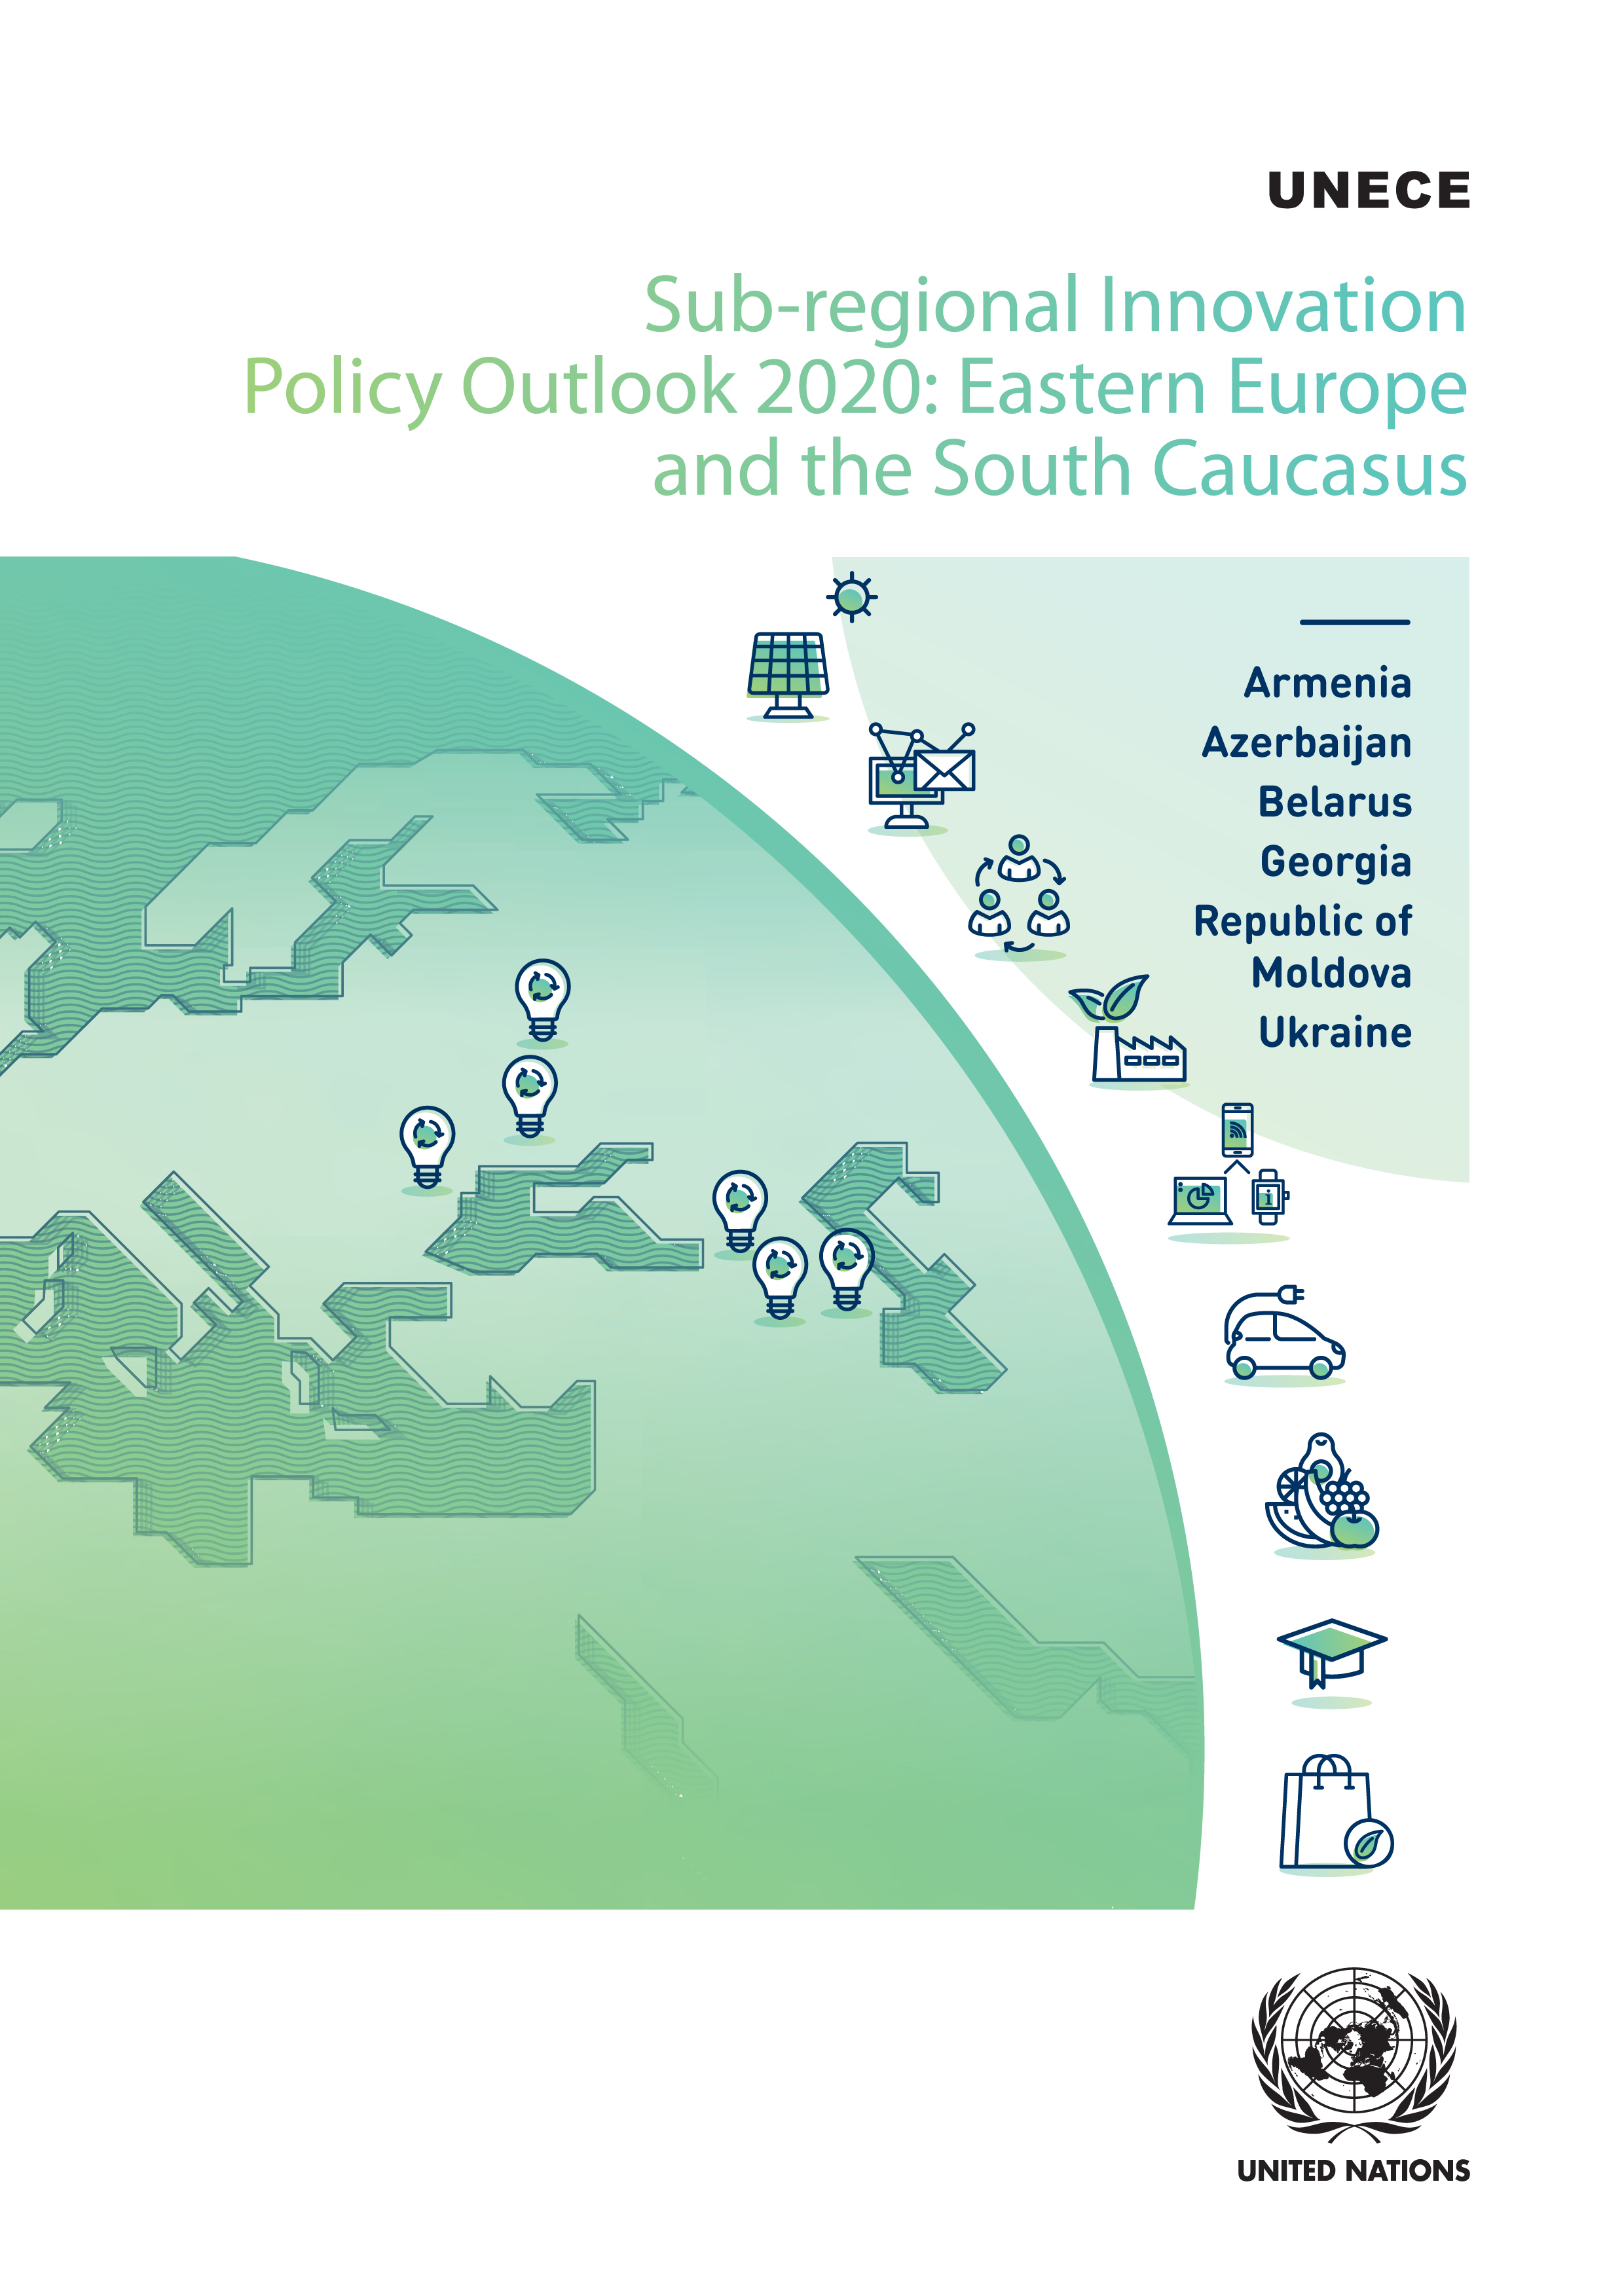 image of Sub-regional Innovation Policy Outlook 2020